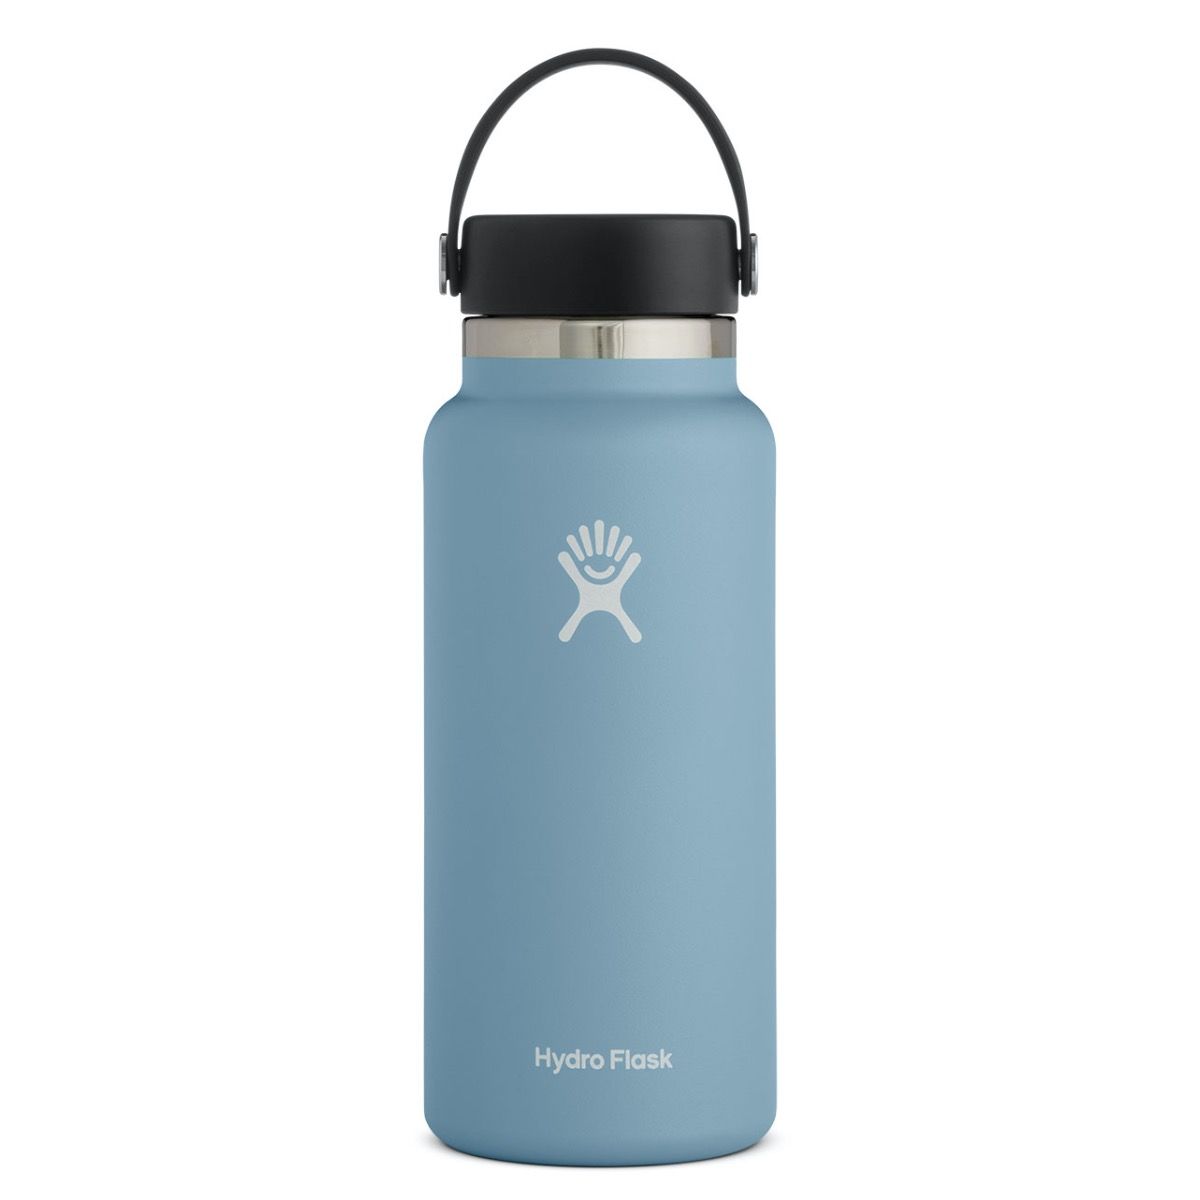 Hydro Flask 12oz Cooler Cup - Snapper